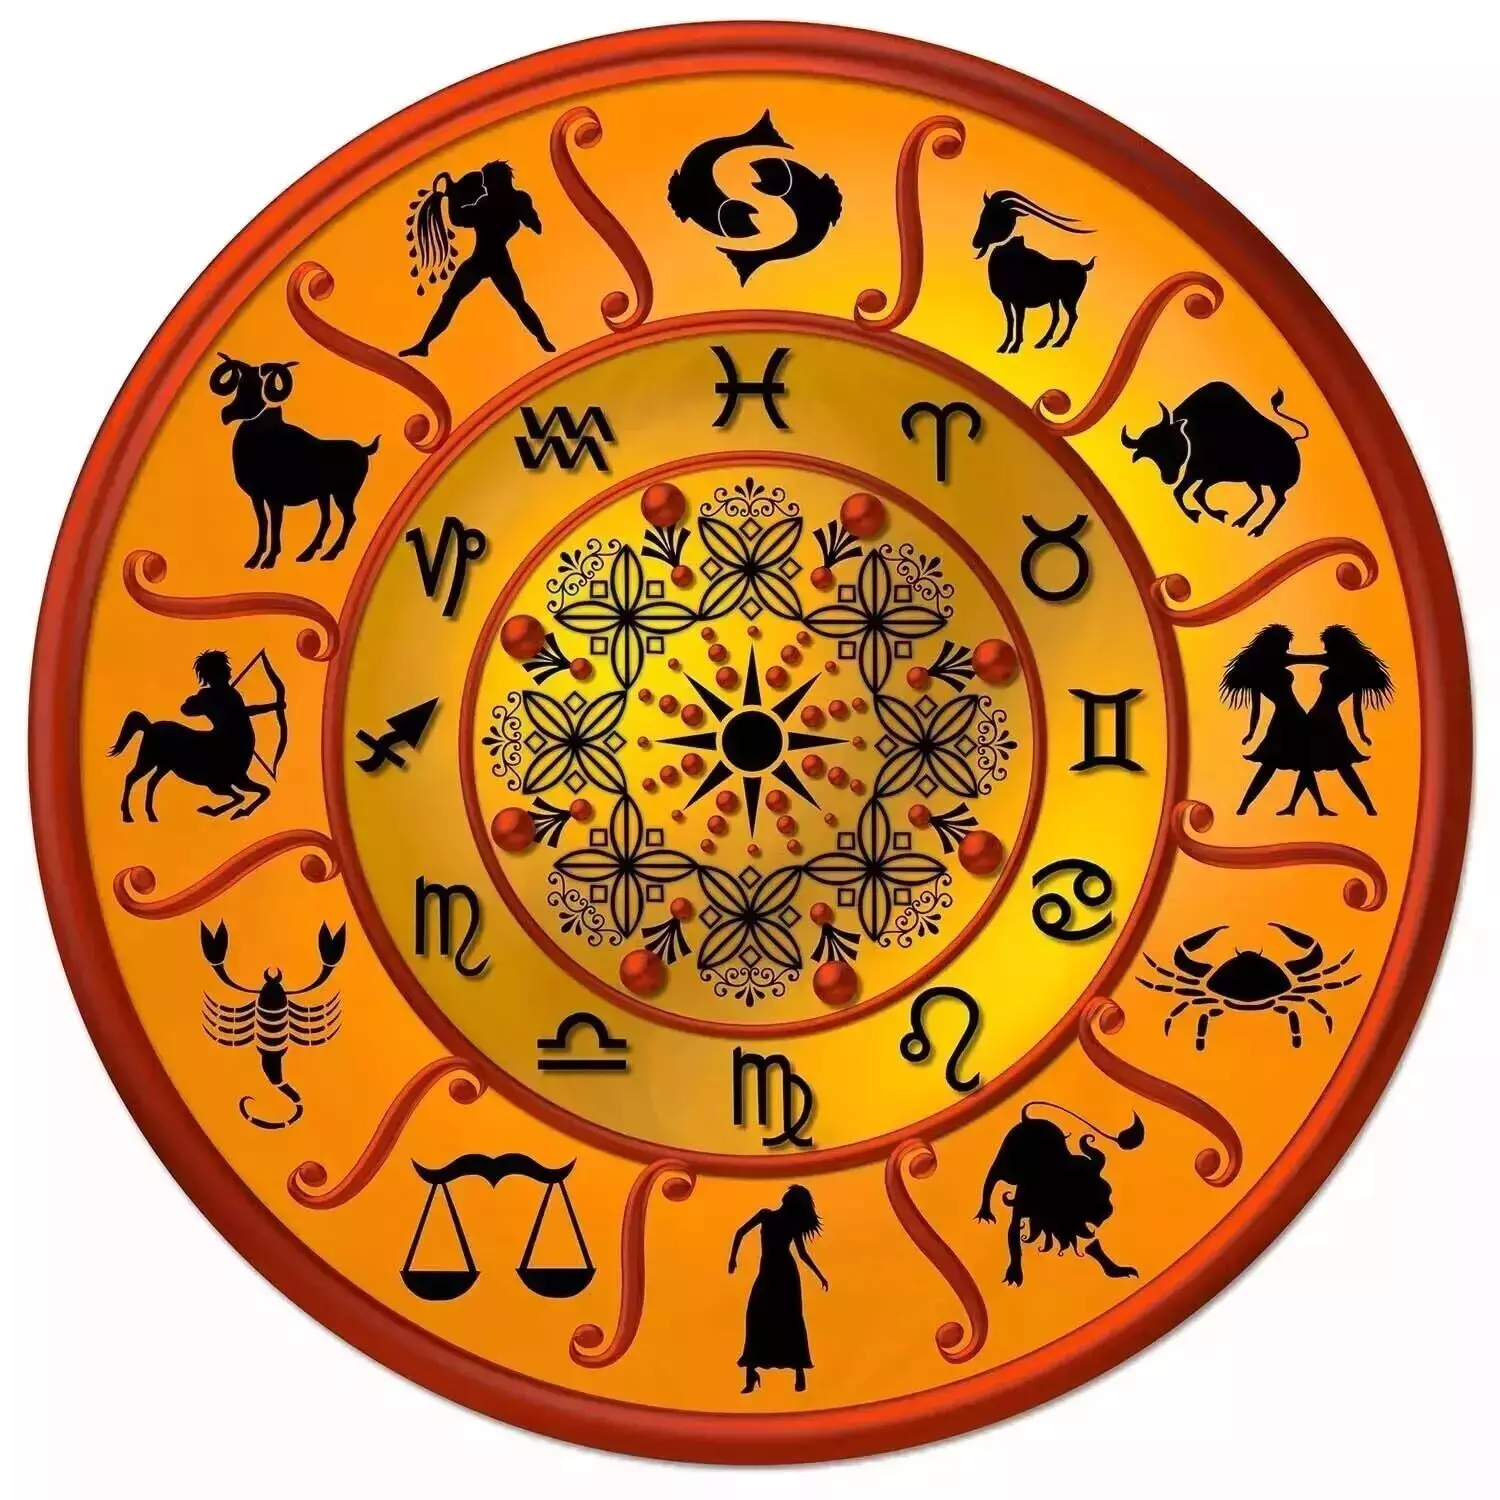 02  April   – Know your todays horoscope